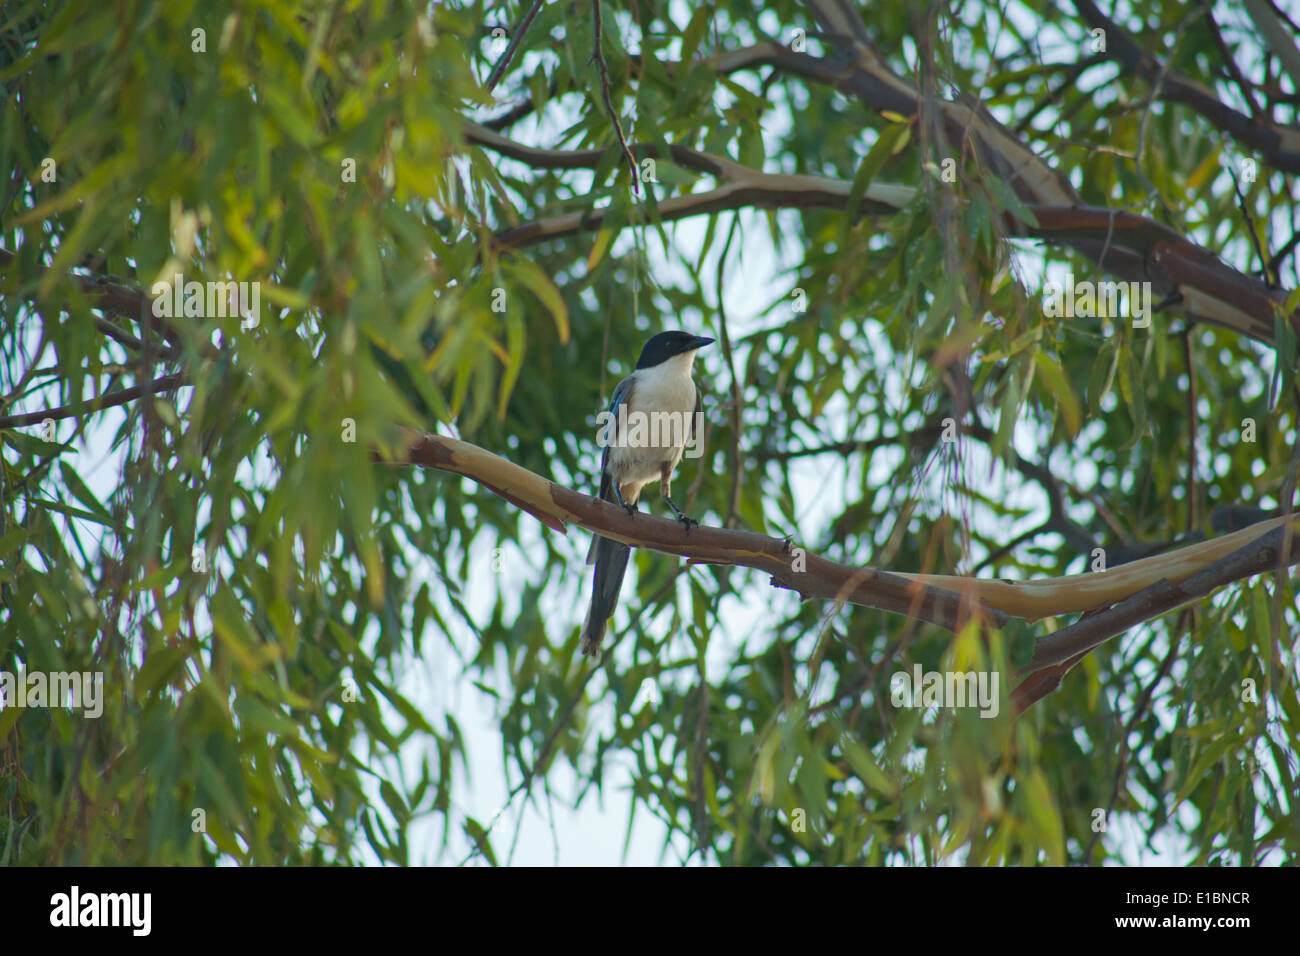 Azure-winged Magpie or Cyanopica cyanus perched on Eucalyptus tree branch Stock Photo